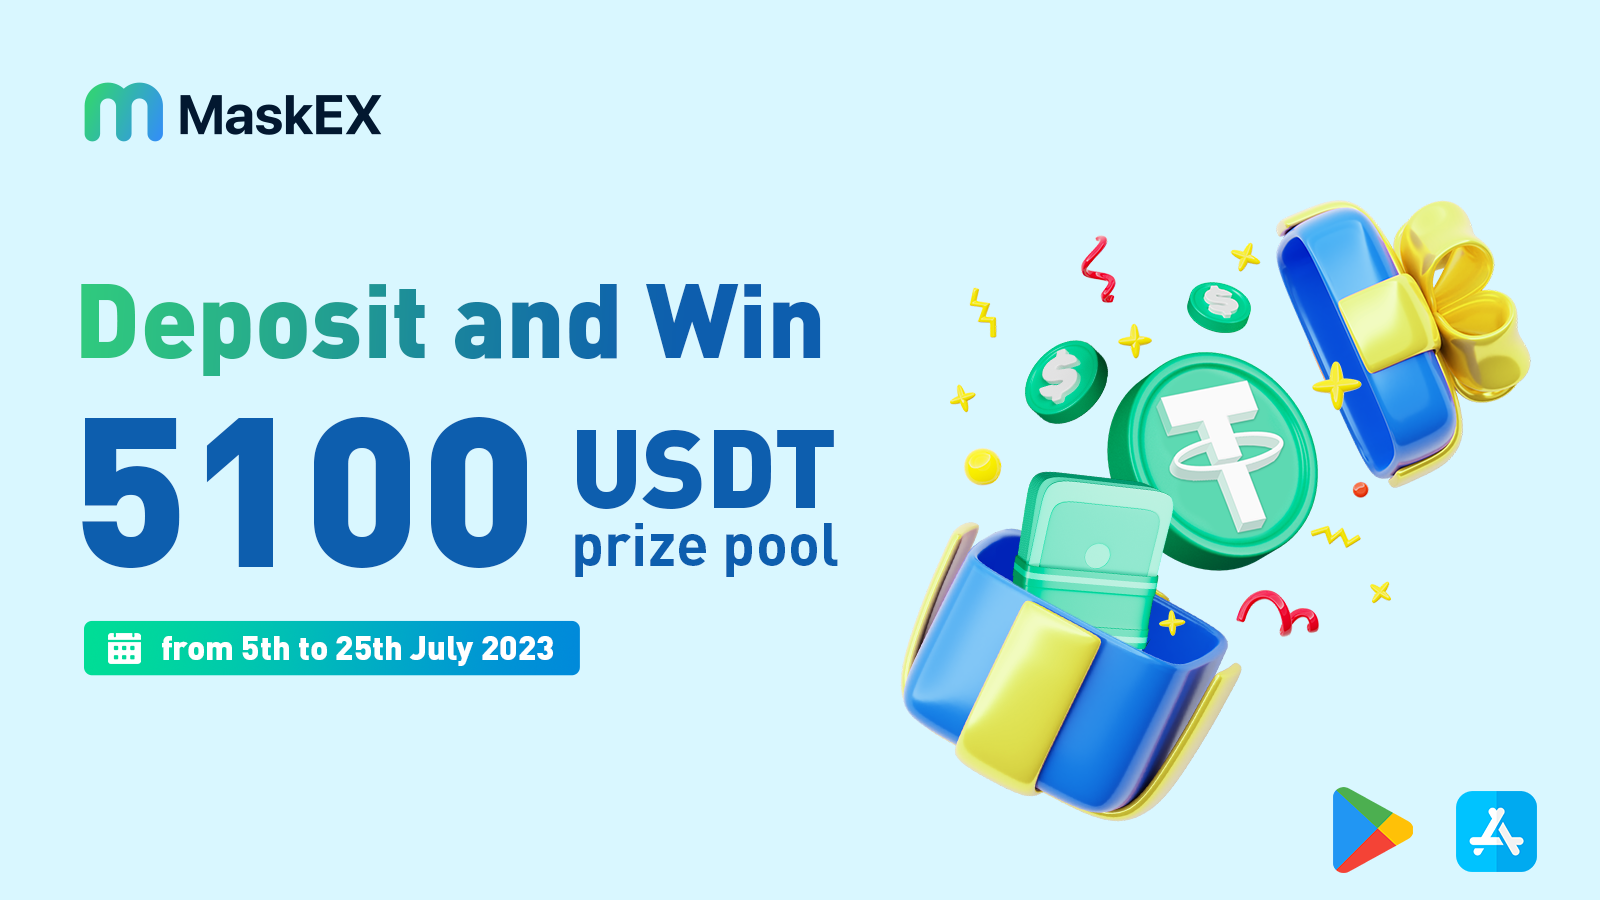 MaskEX Deposit and Win Campaign (July)